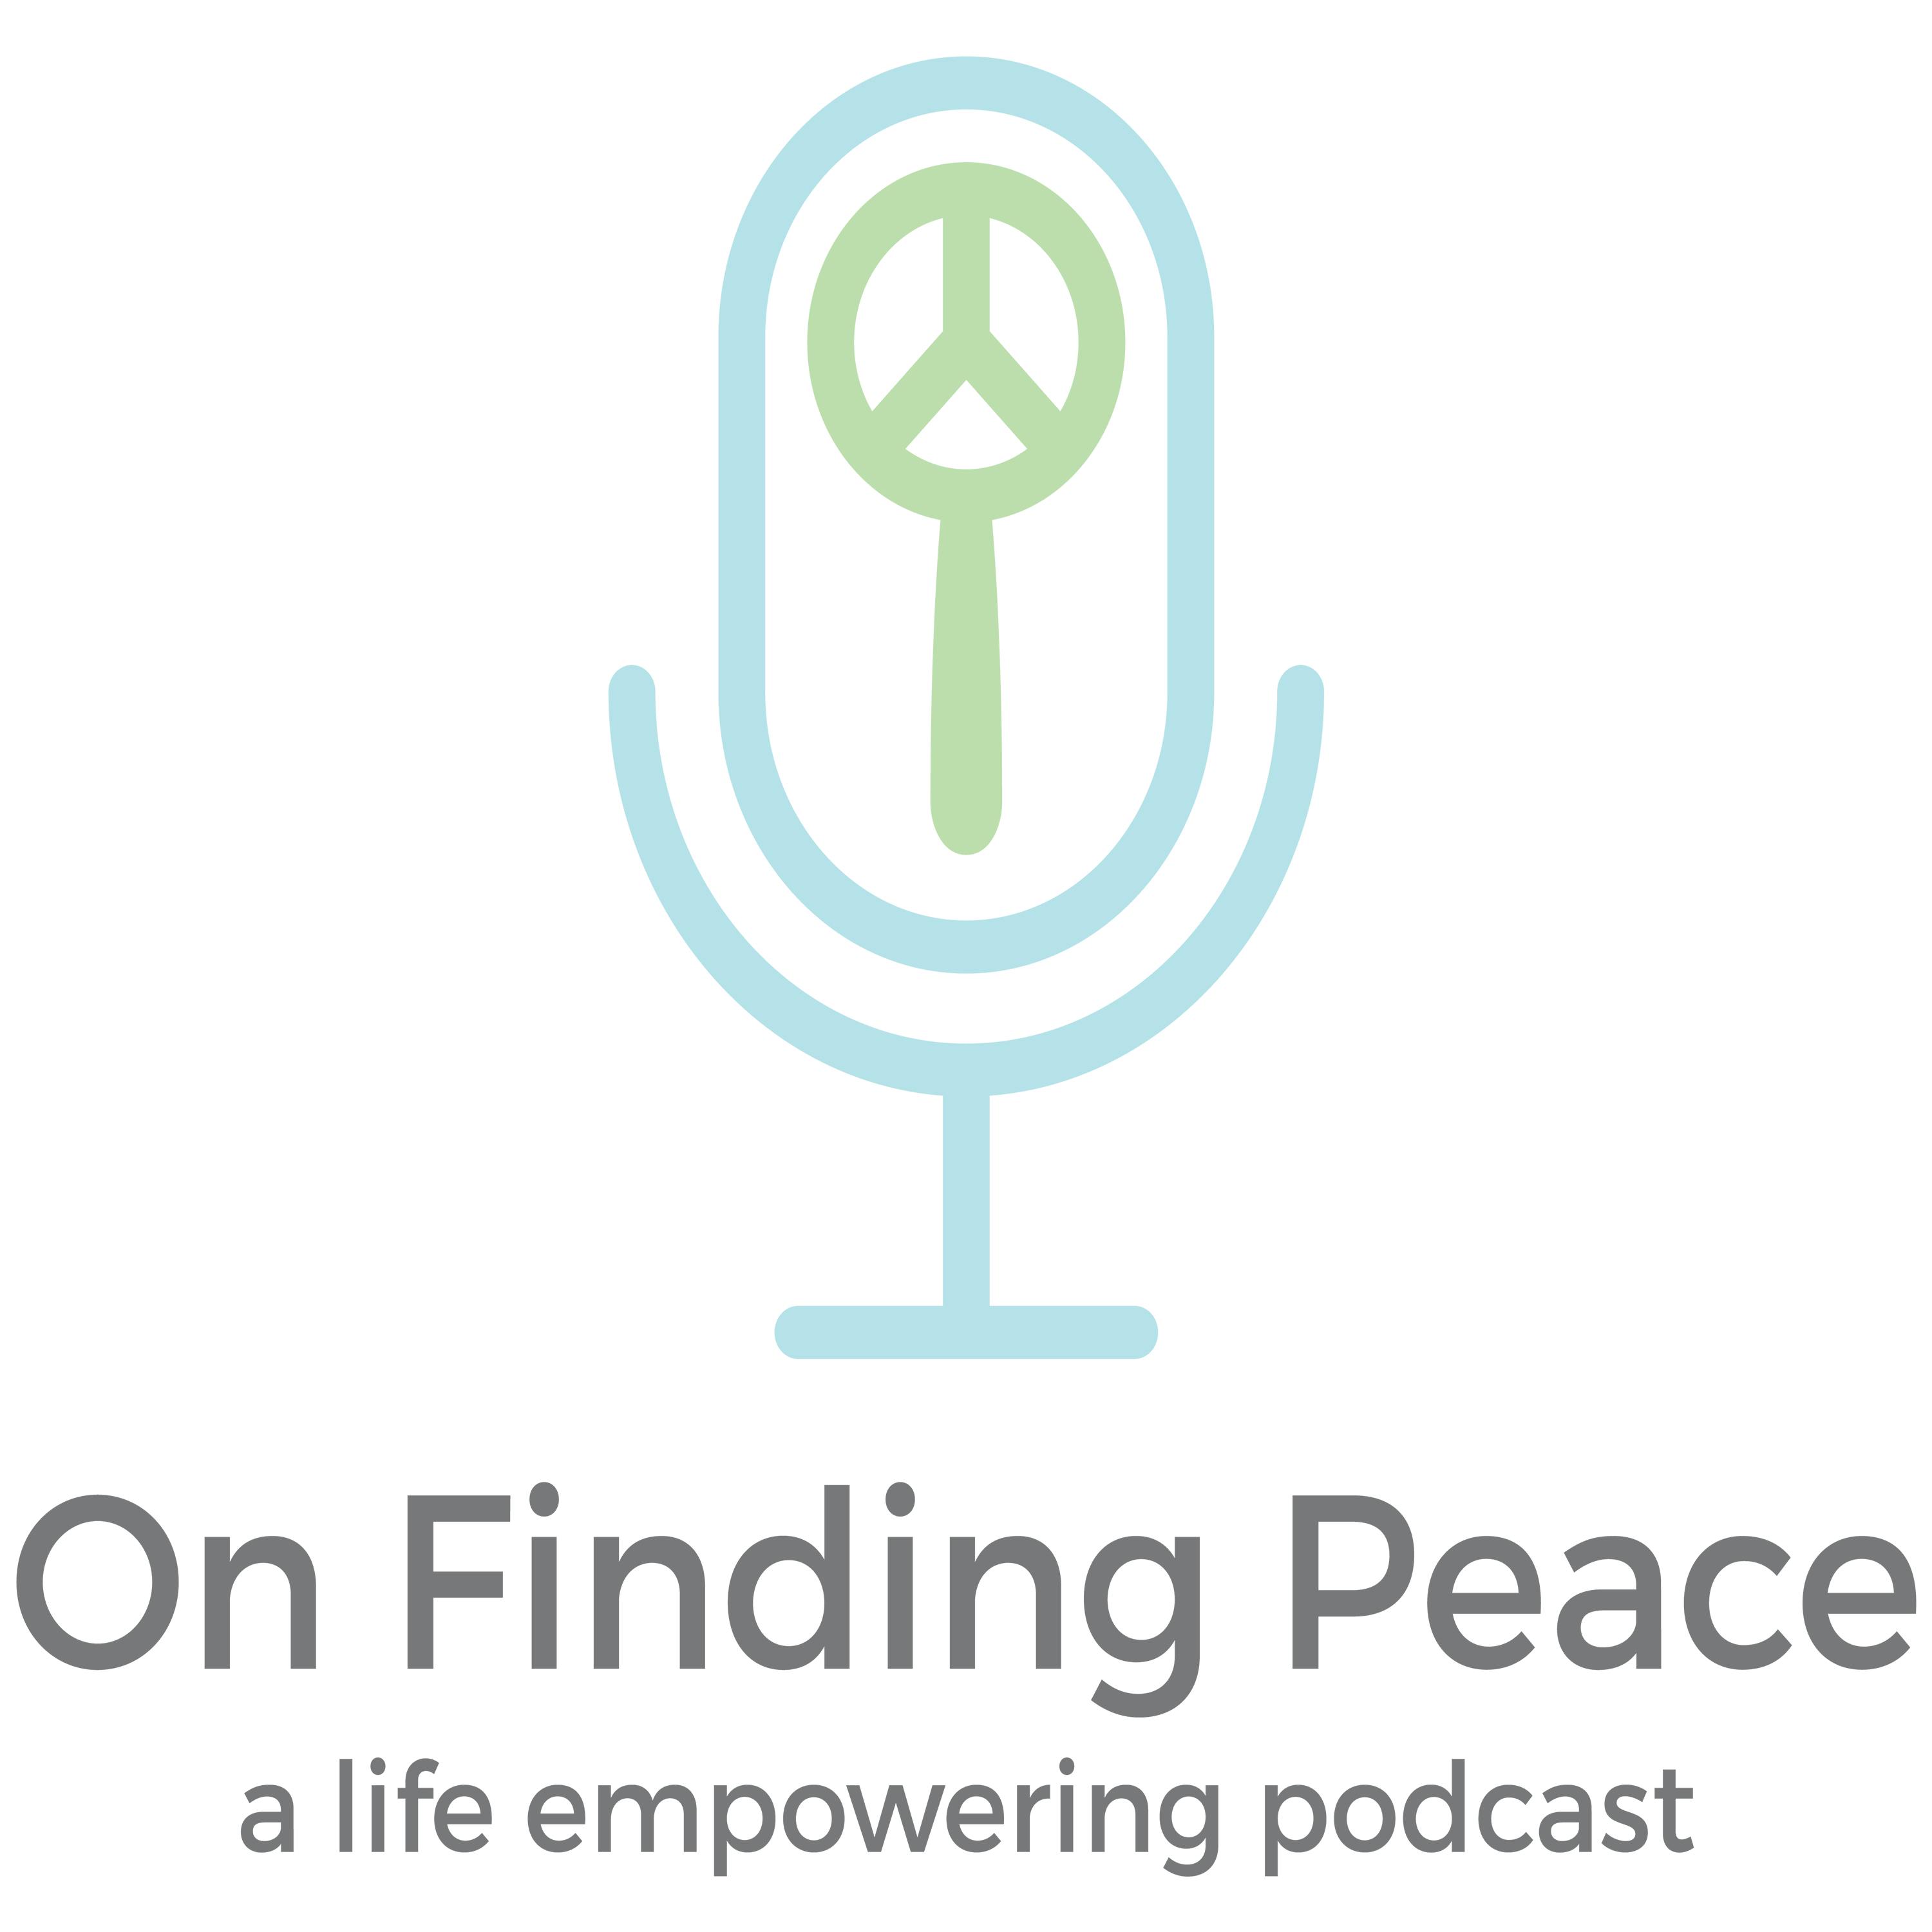 On Finding Peace